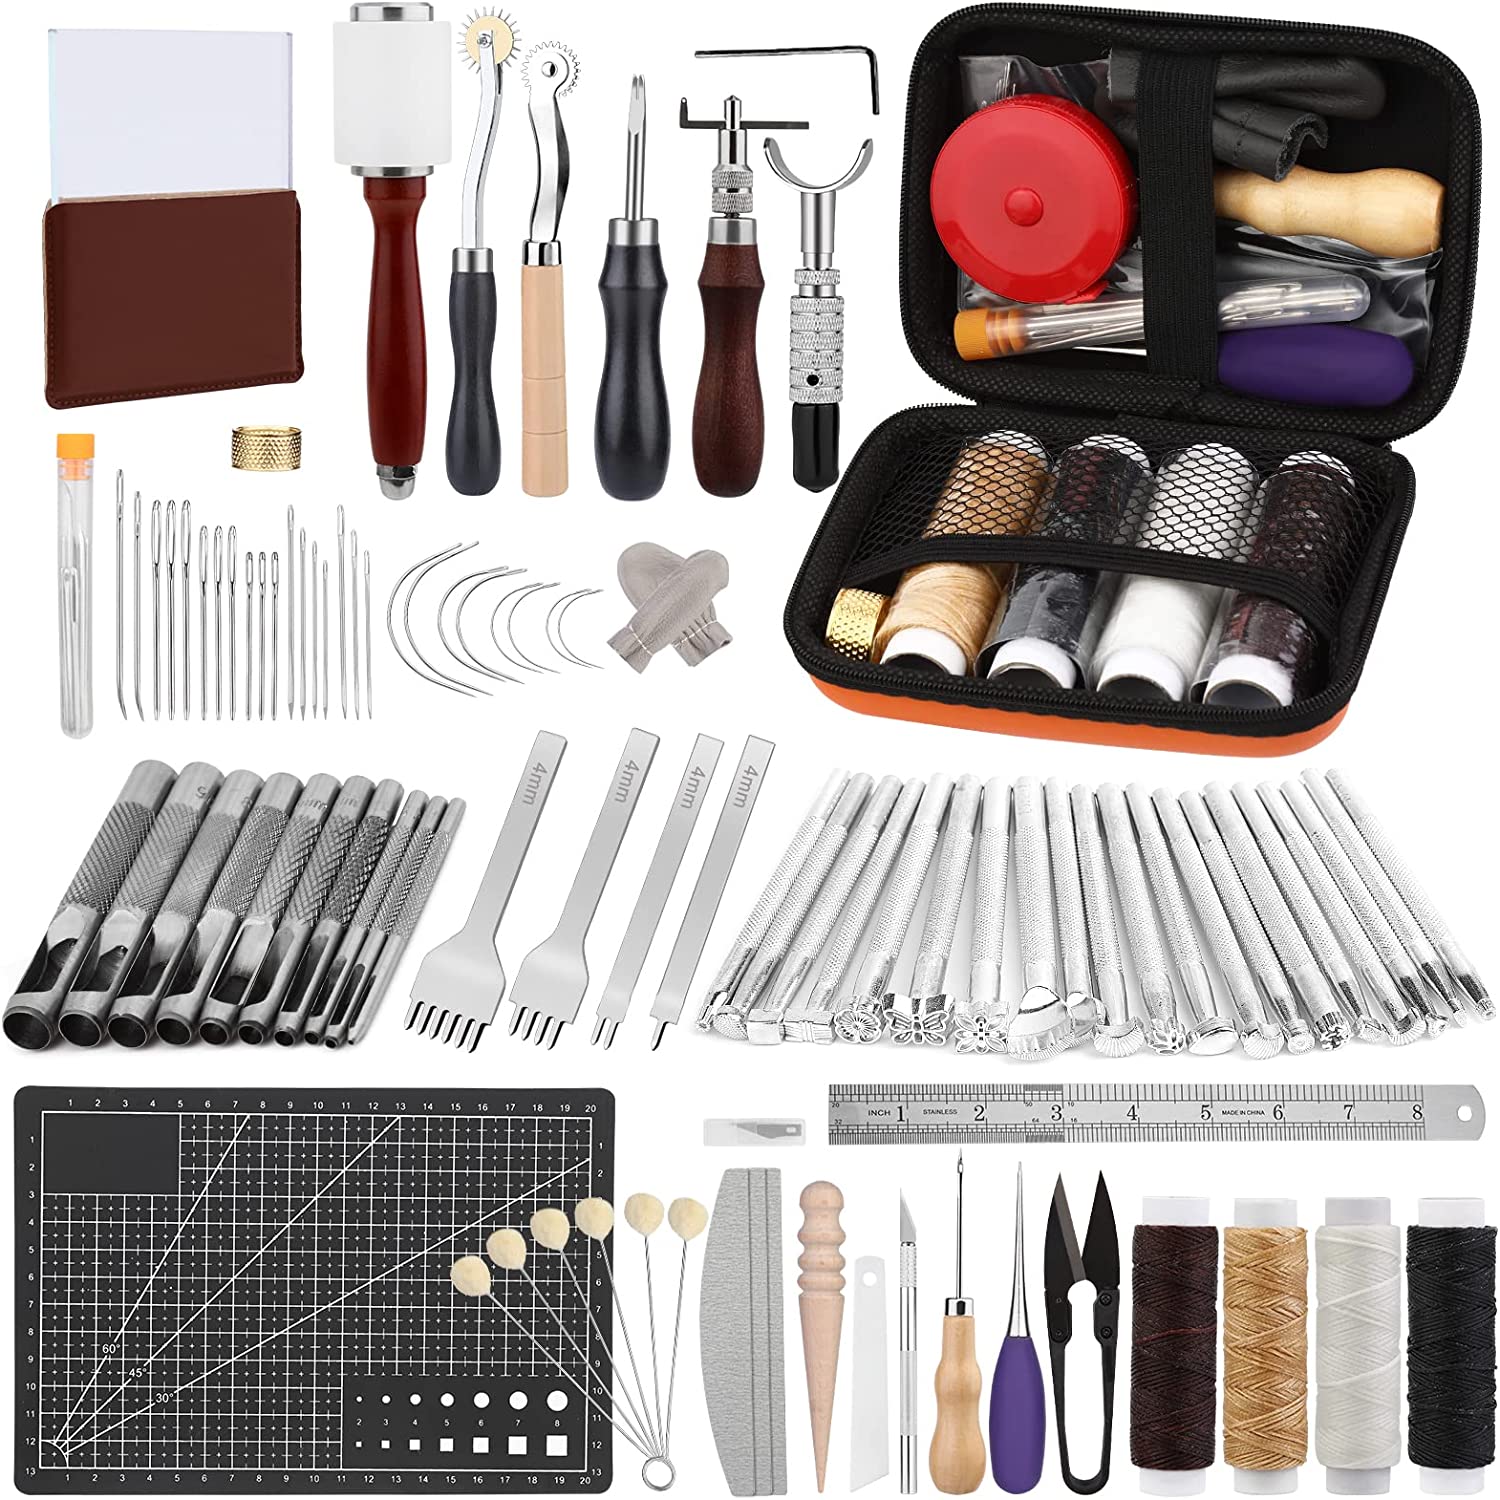 TLKKUE Leather Upholstery Repair Sewing Kit, Leather Crafting Tools and  Supplies Leather Working Kit with Waxed Thread Heavy Duty Sewing Needles  Awls